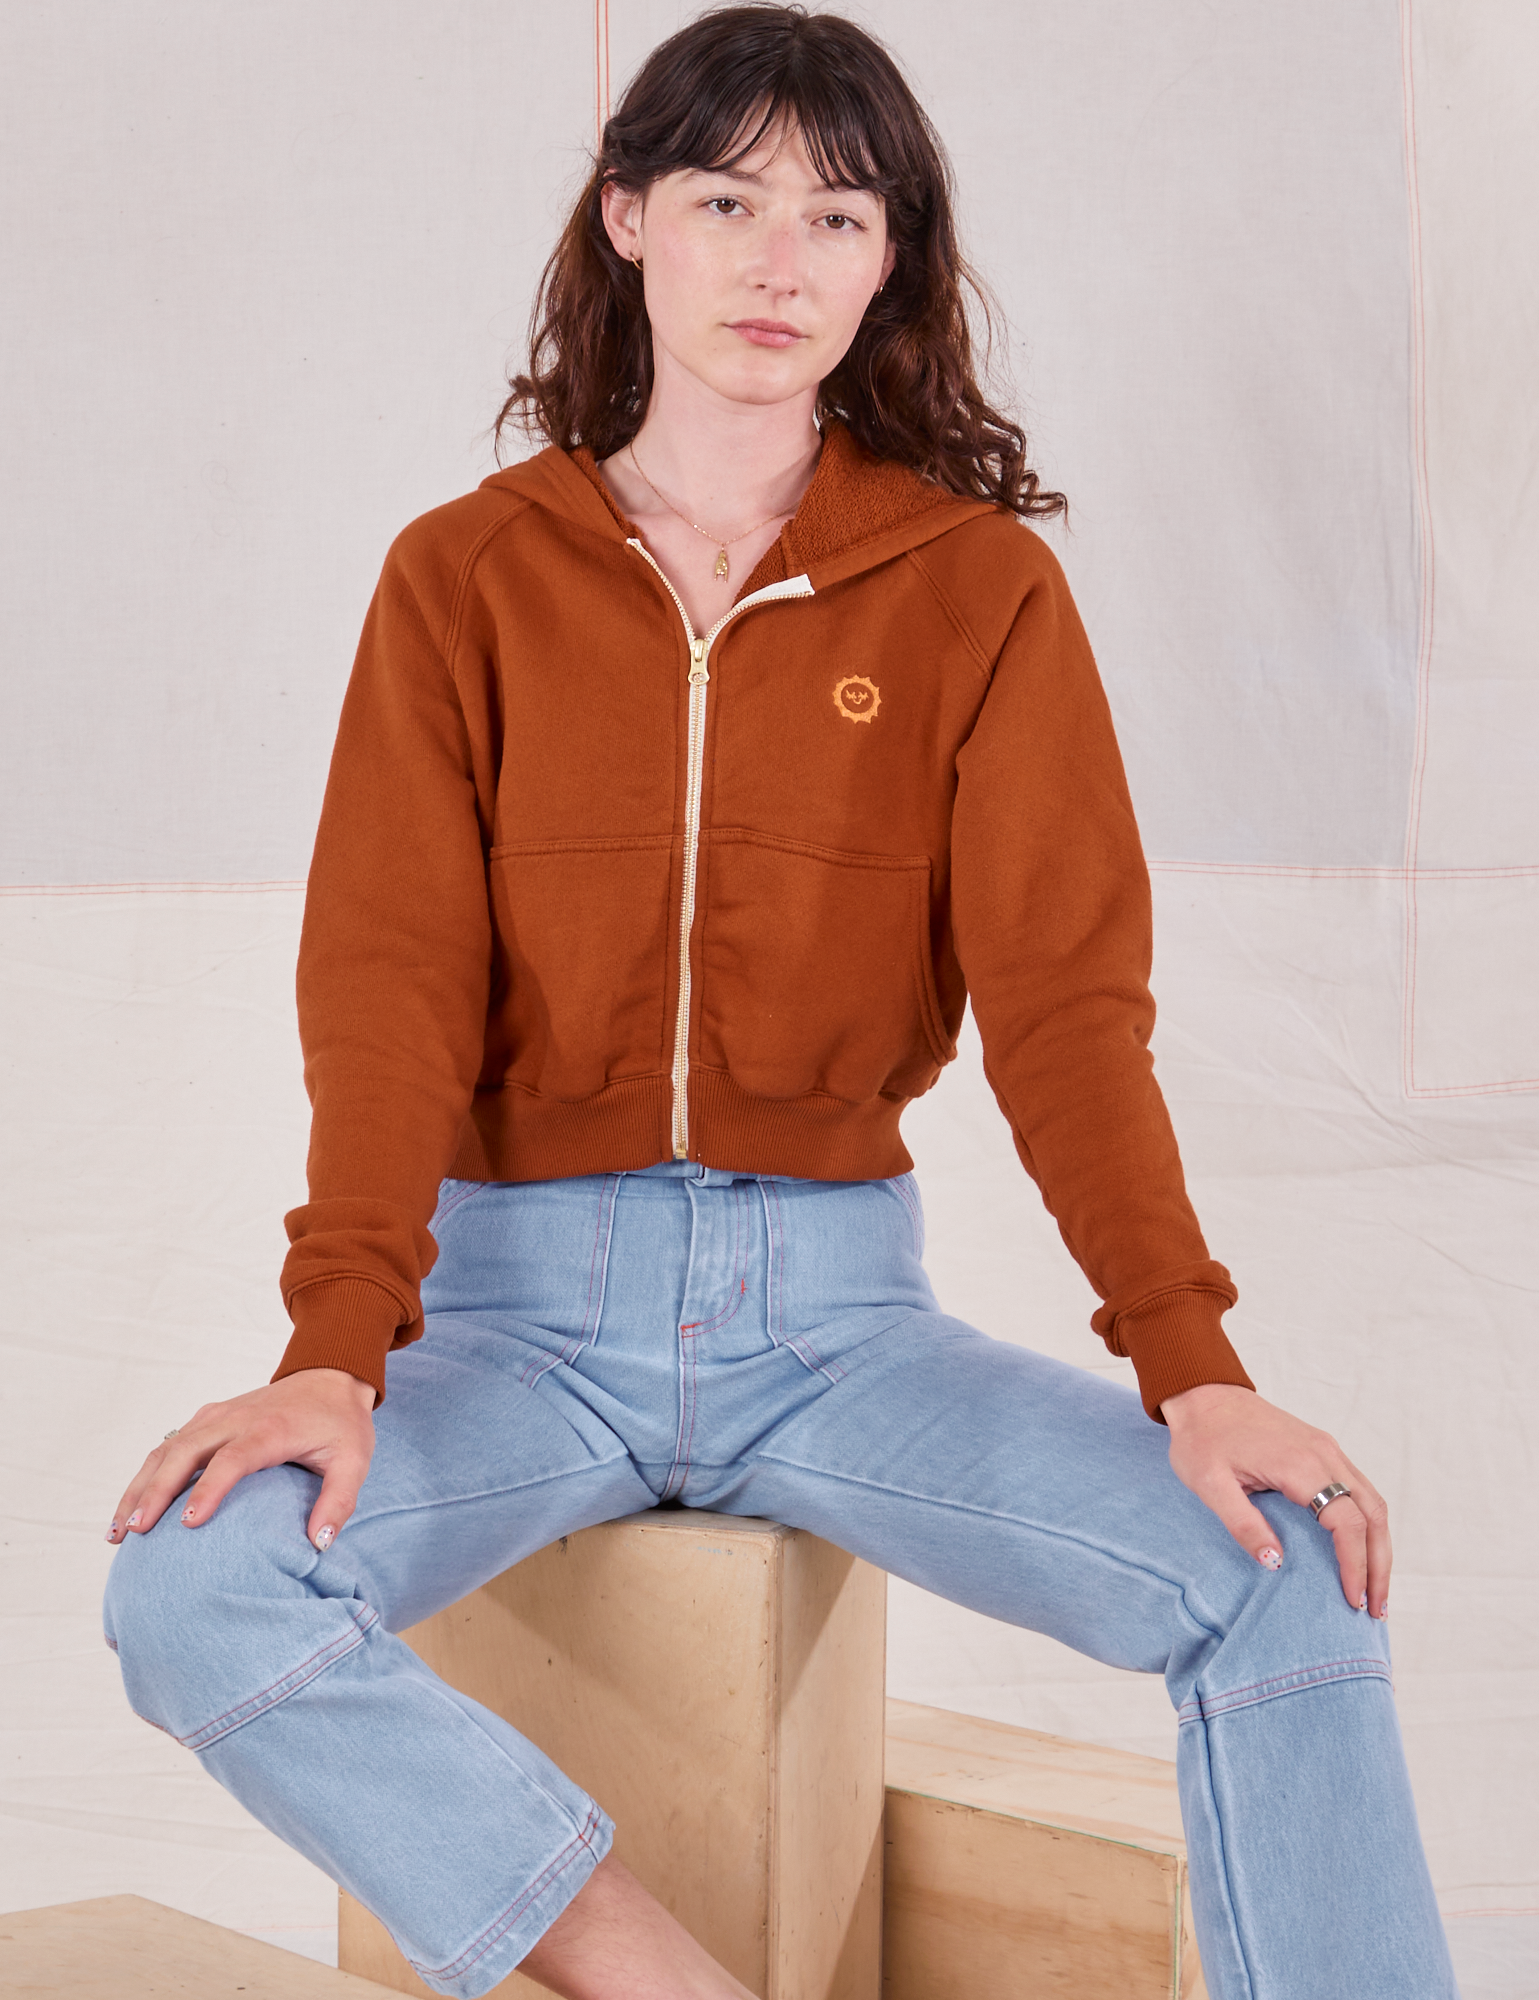 Alex is wearing Cropped Zip Hoodie in Burnt Terracotta and light wash Carpenter Jeans